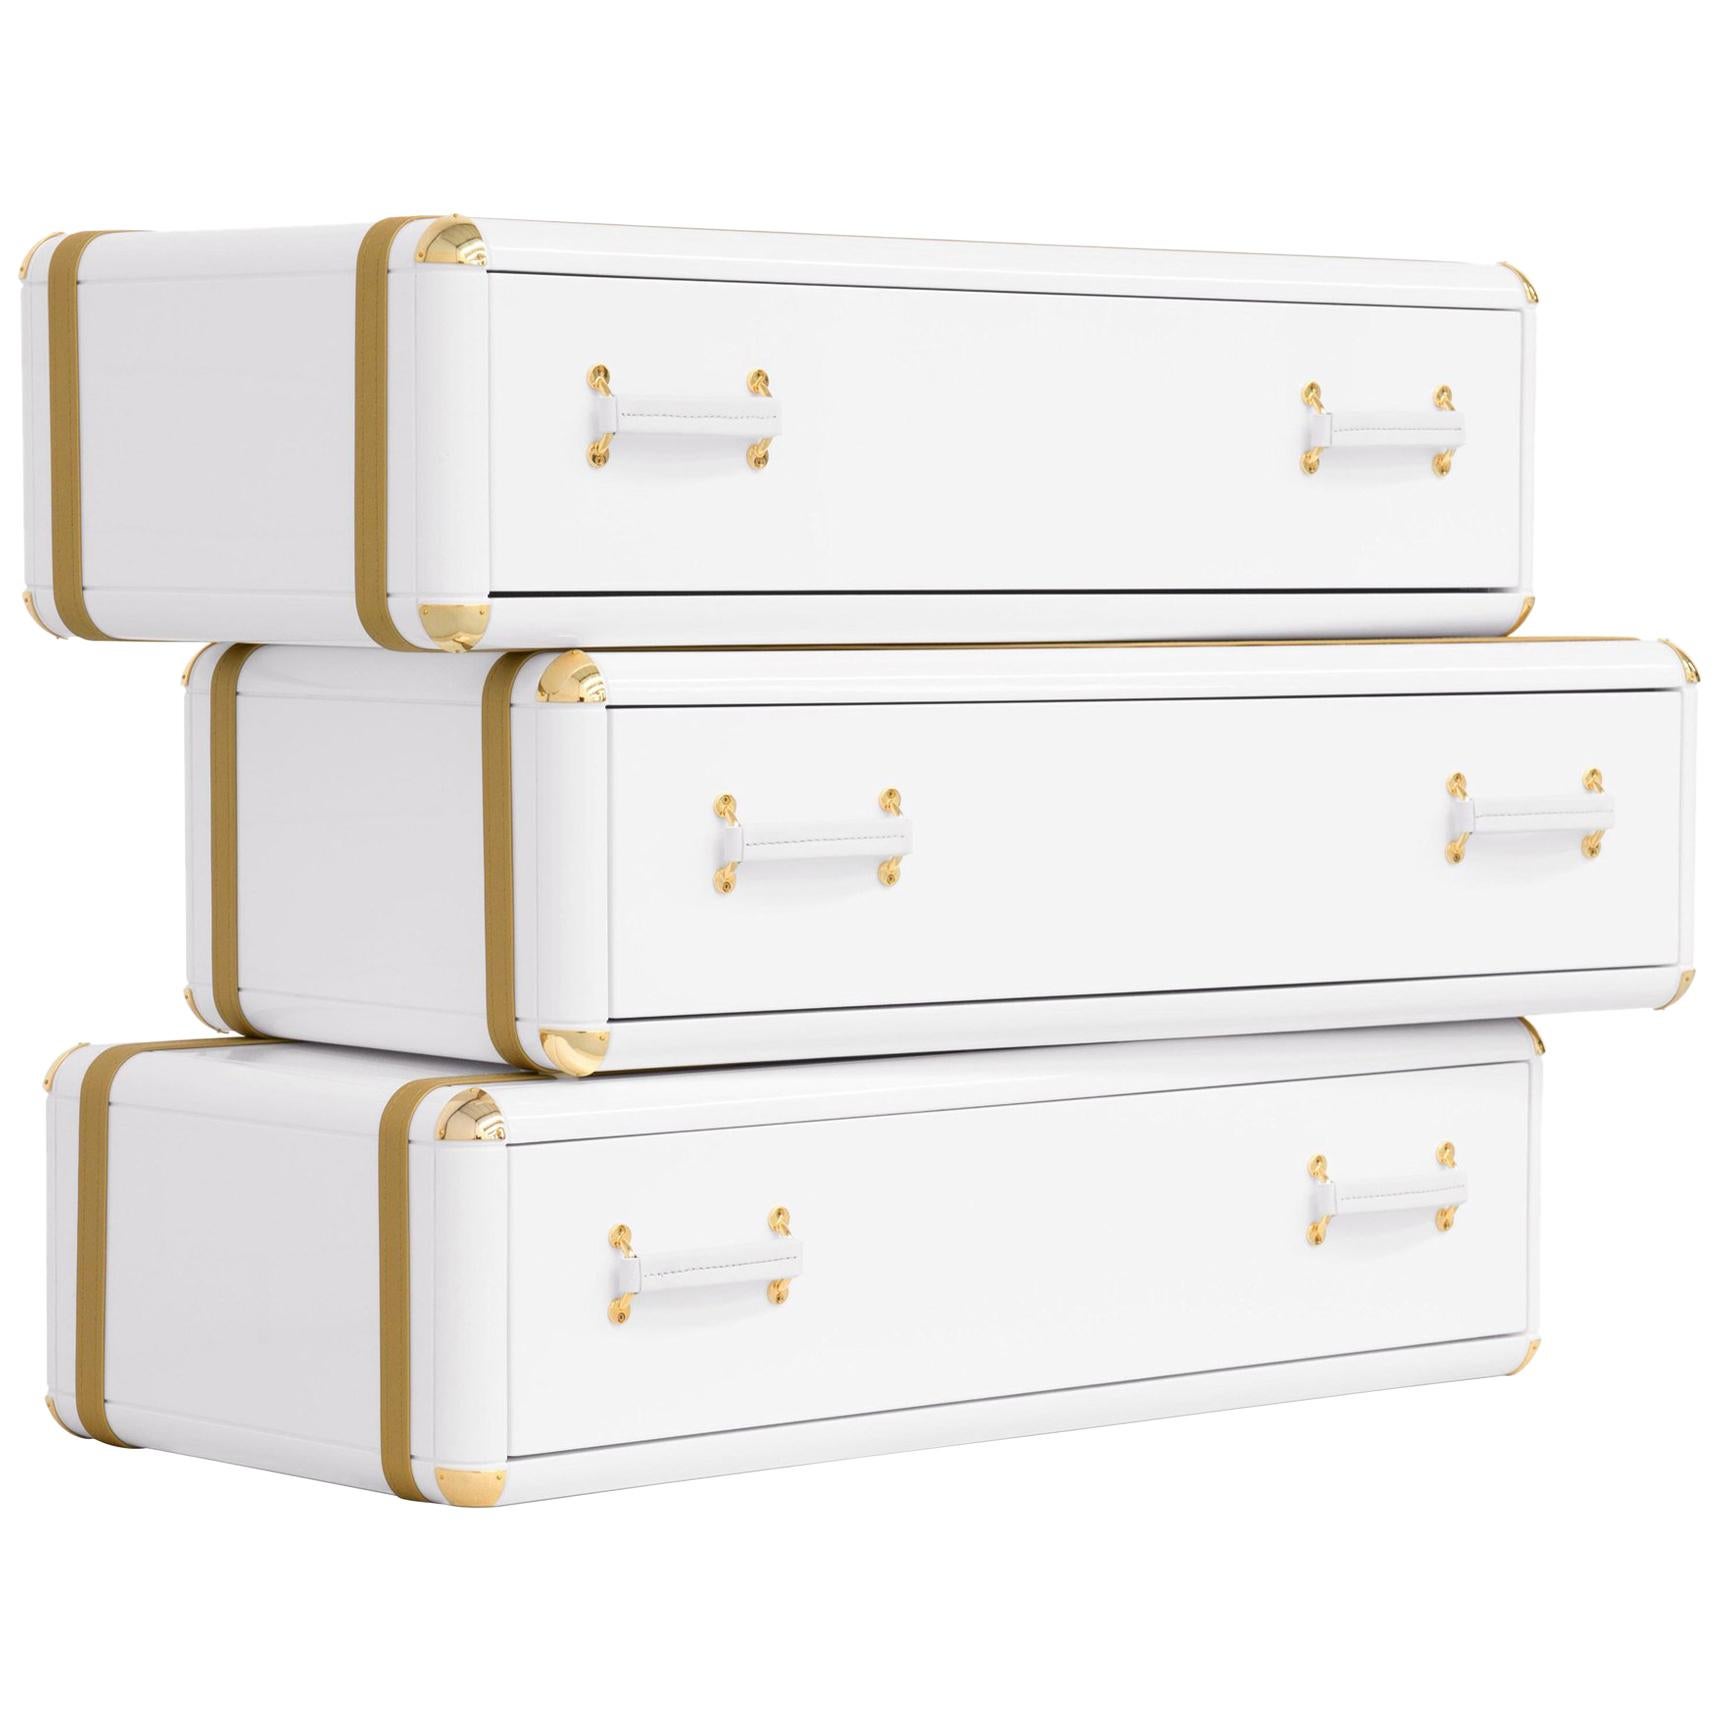 White Flight Case Shelf of 3 Drawers in White Lacquered Finish For Sale